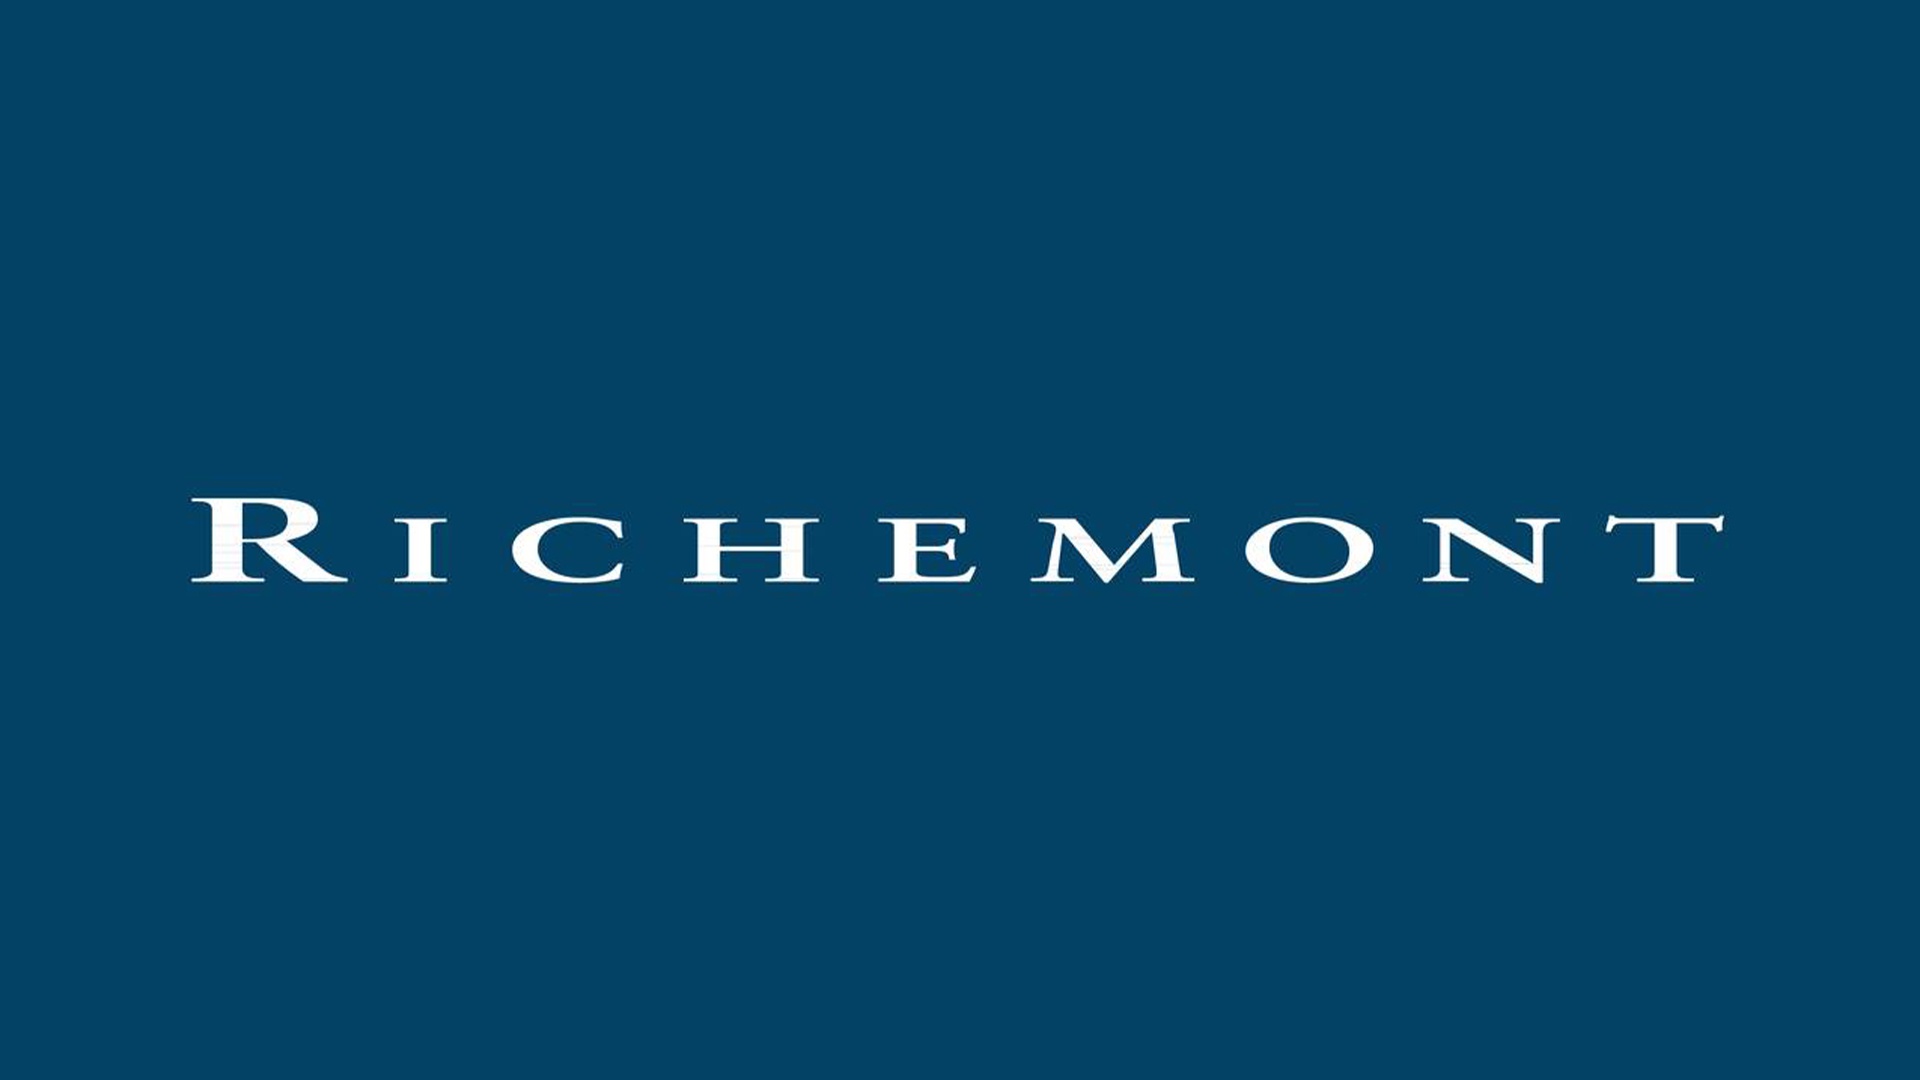 Richemont International SA et al v. The Partnerships and Unincorporated Associations Identified on Schedule A